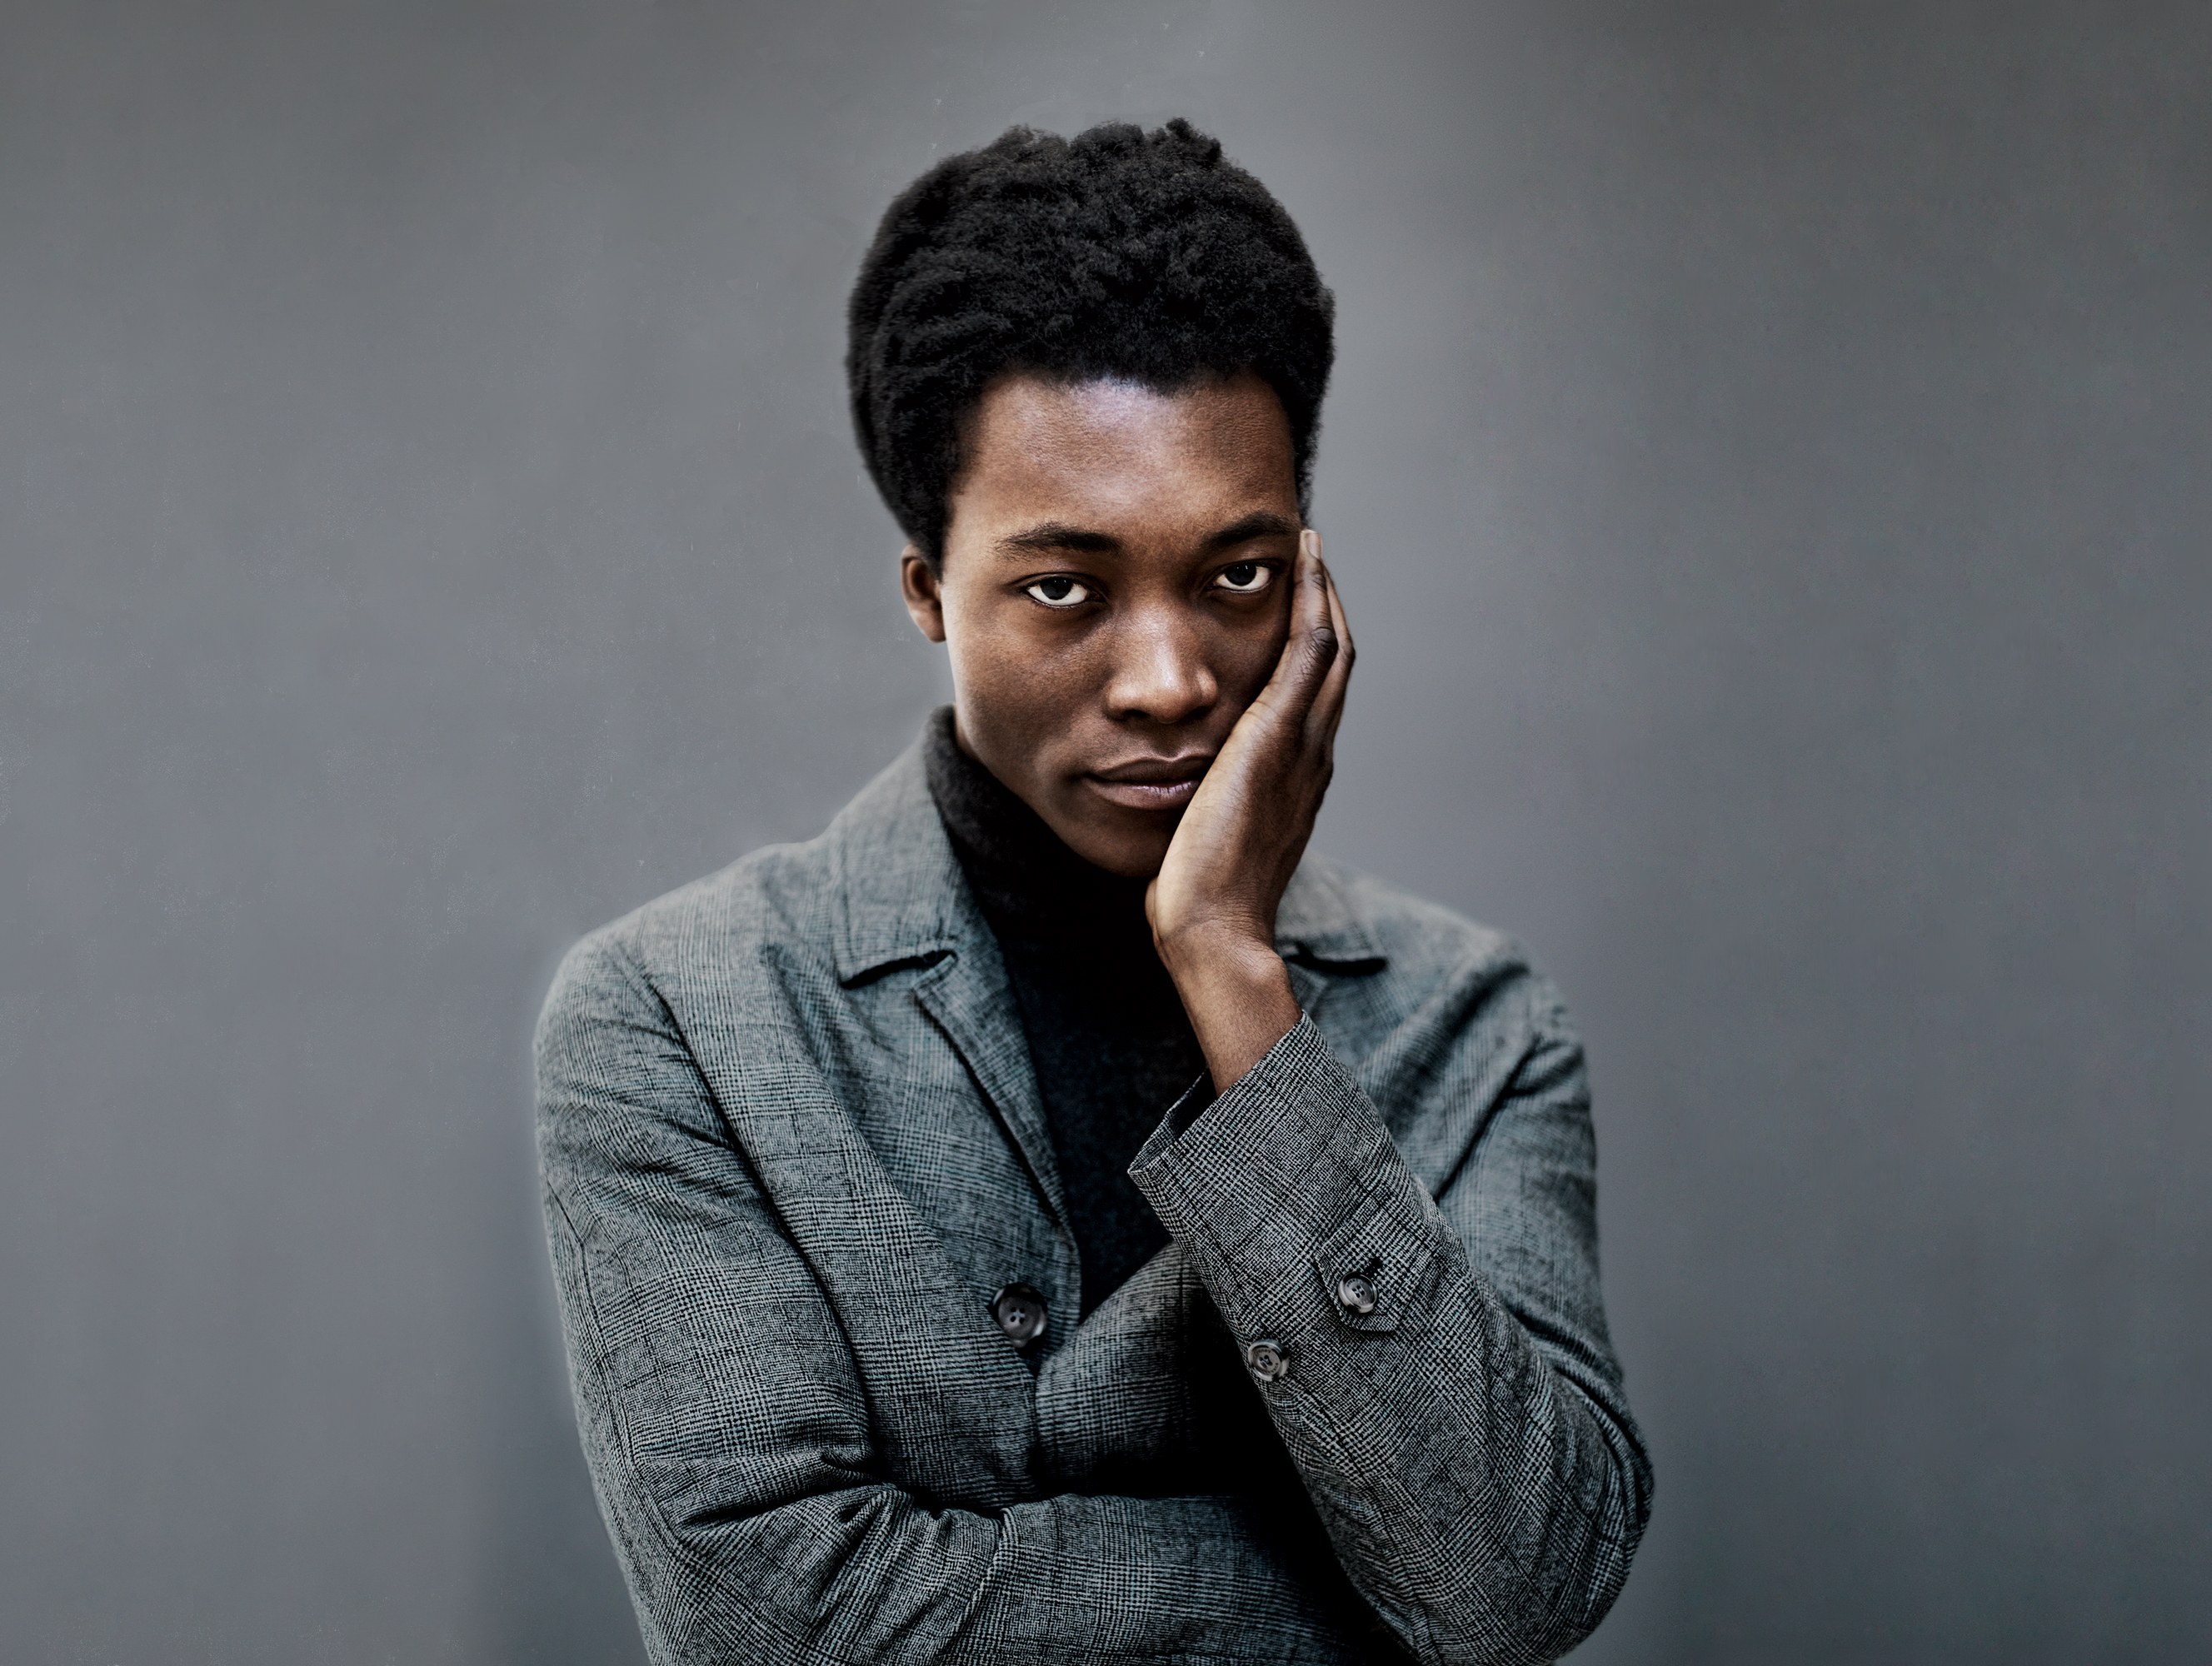 Benjamin Clementine — I Tell A Fly